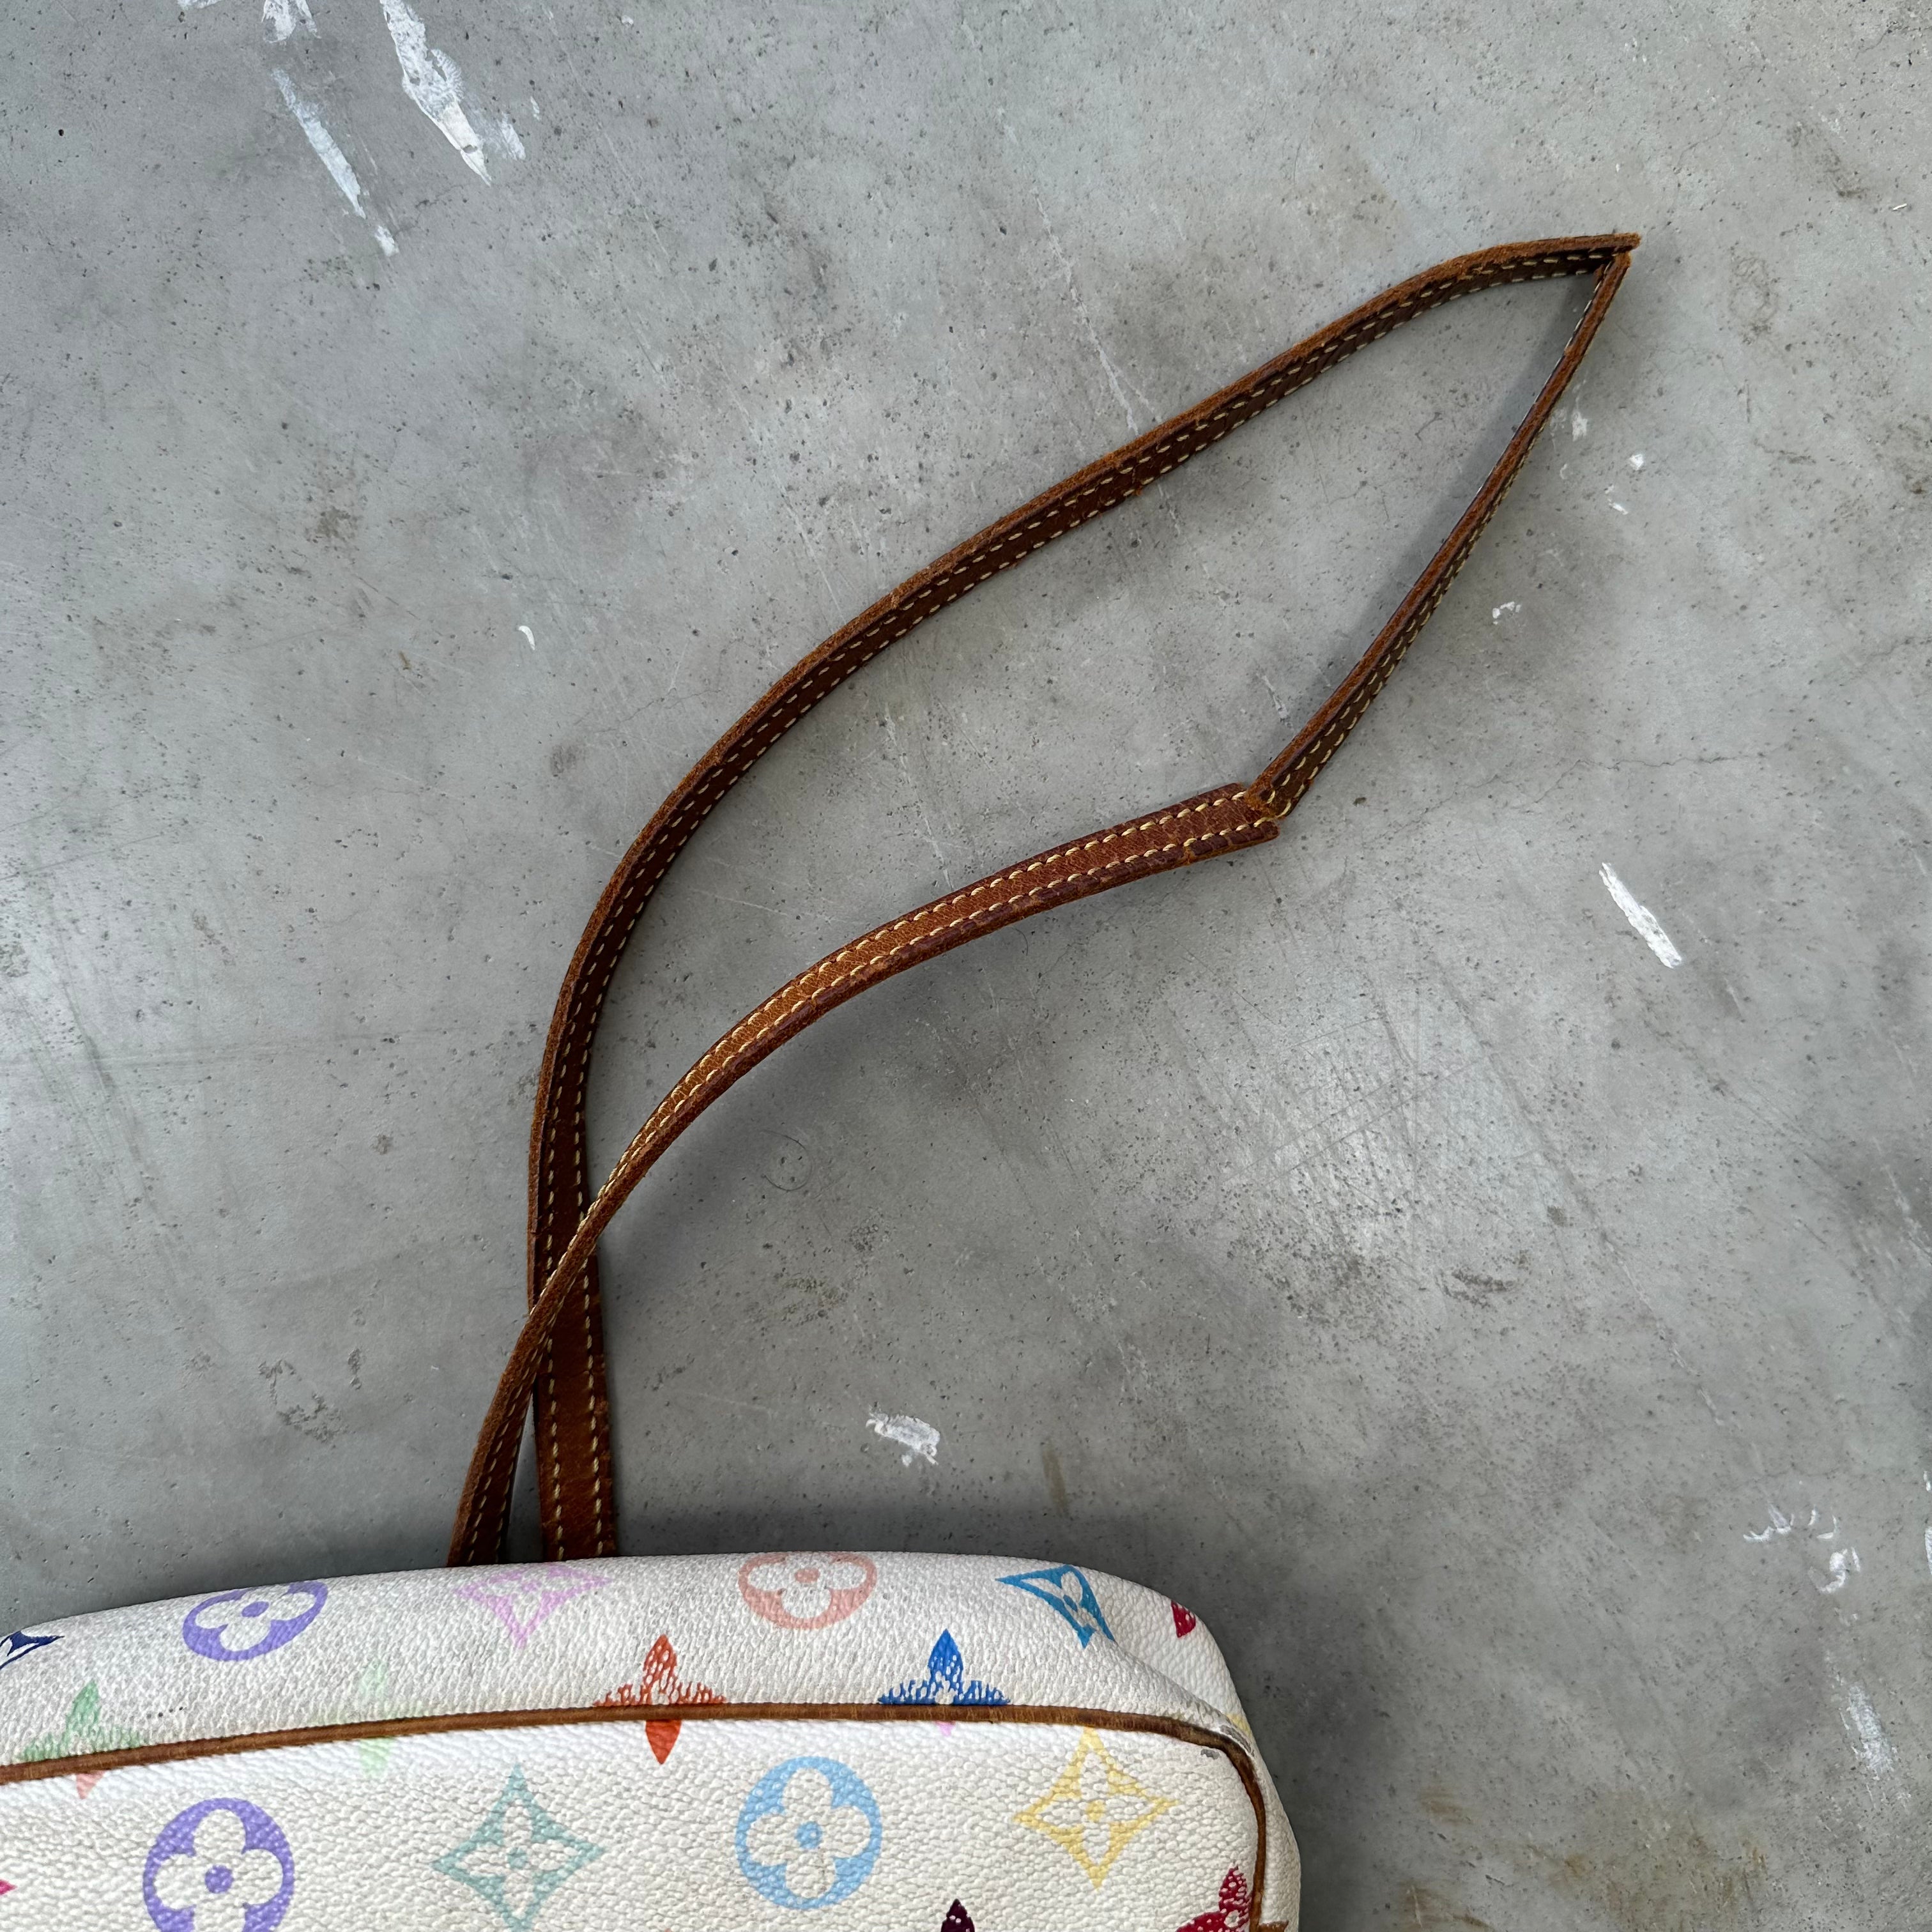 Louis Vuitton Murakami Multicolor Pochette Bag with Long Strap – Curated by  Charbel